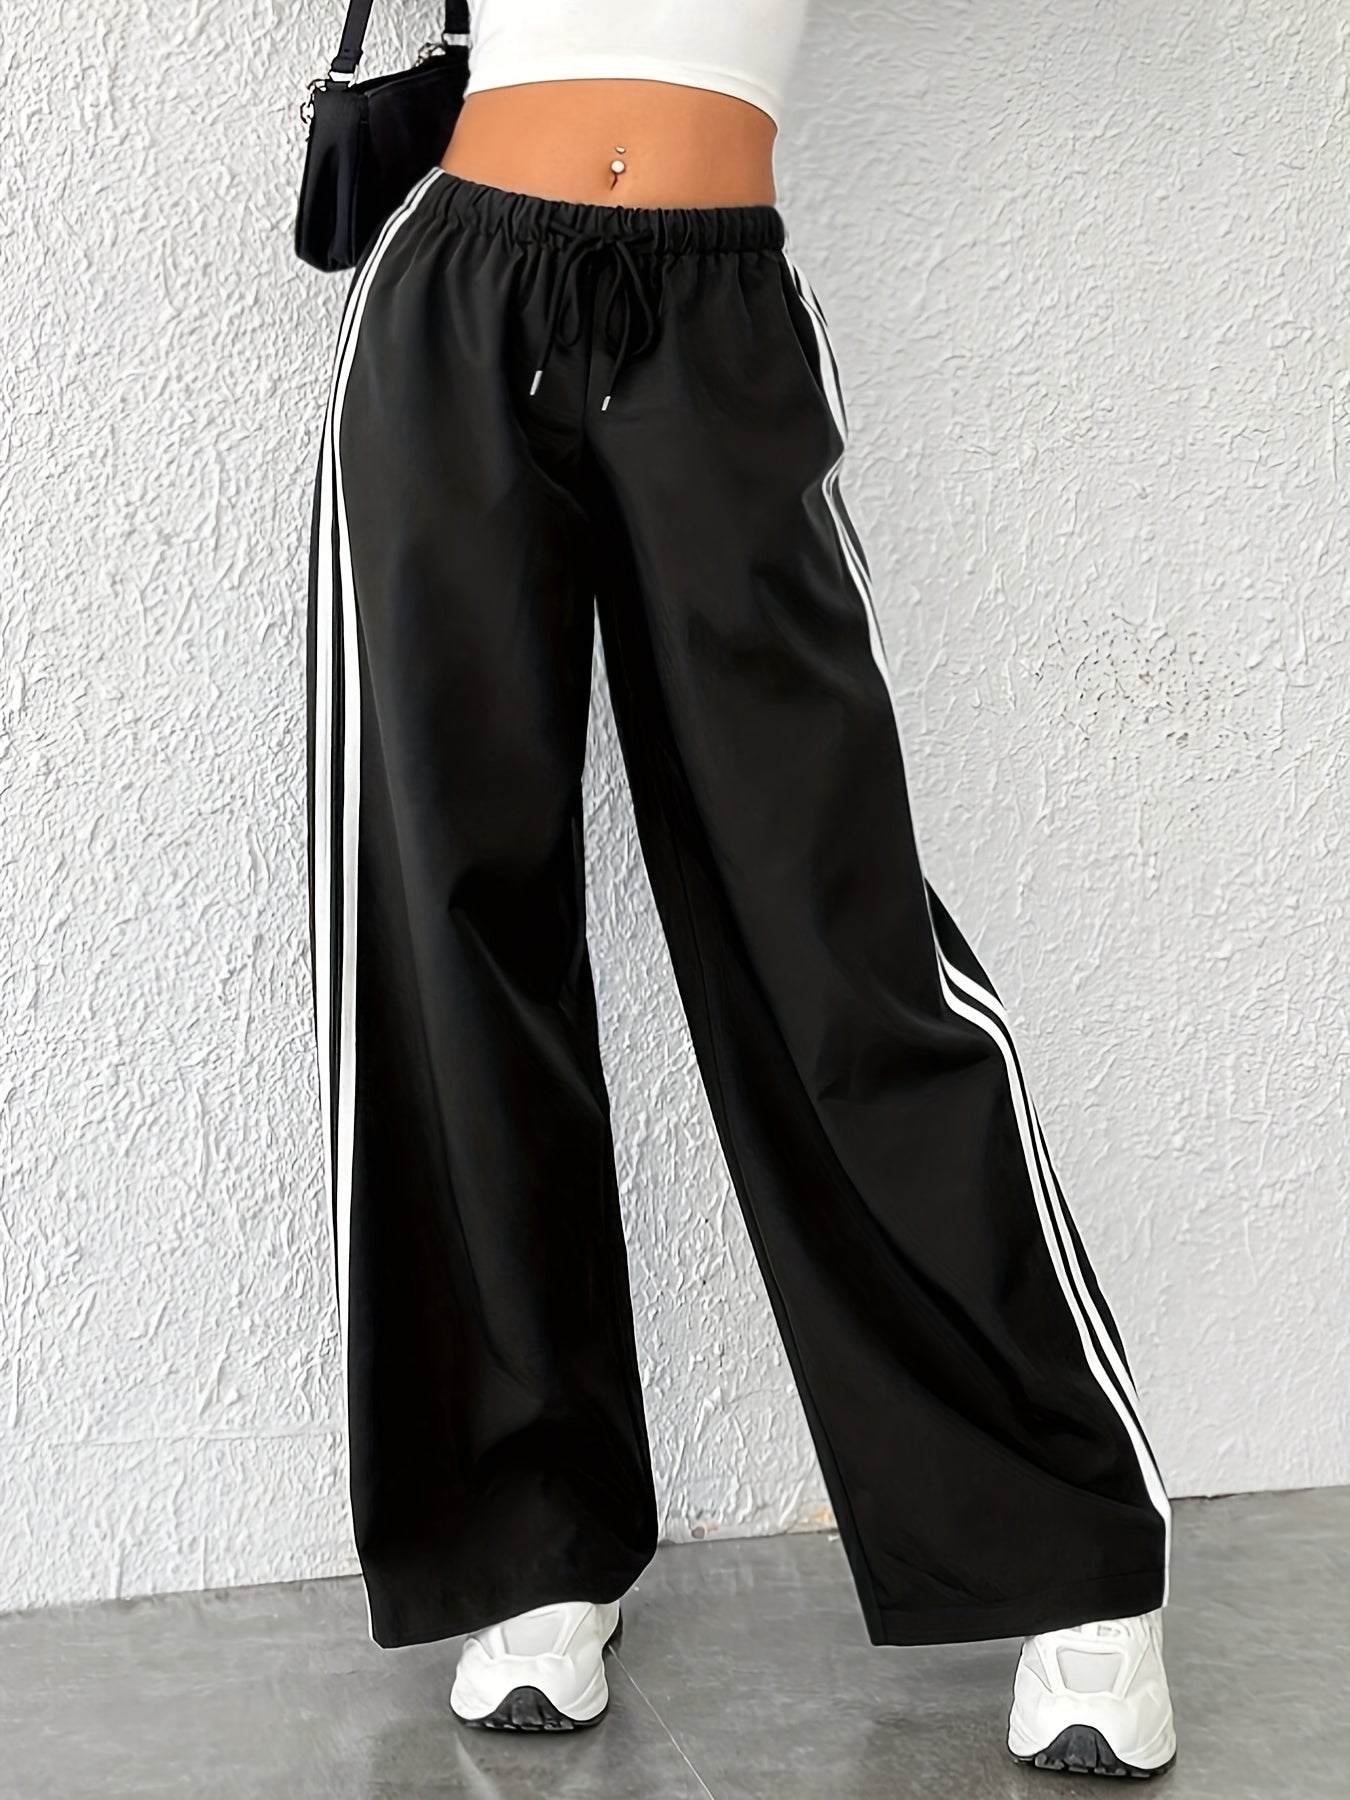 xieyinshe Striped Drawstring Waist Pants, Casual Wide Leg Pants For Spring & Fall, Women's Clothing